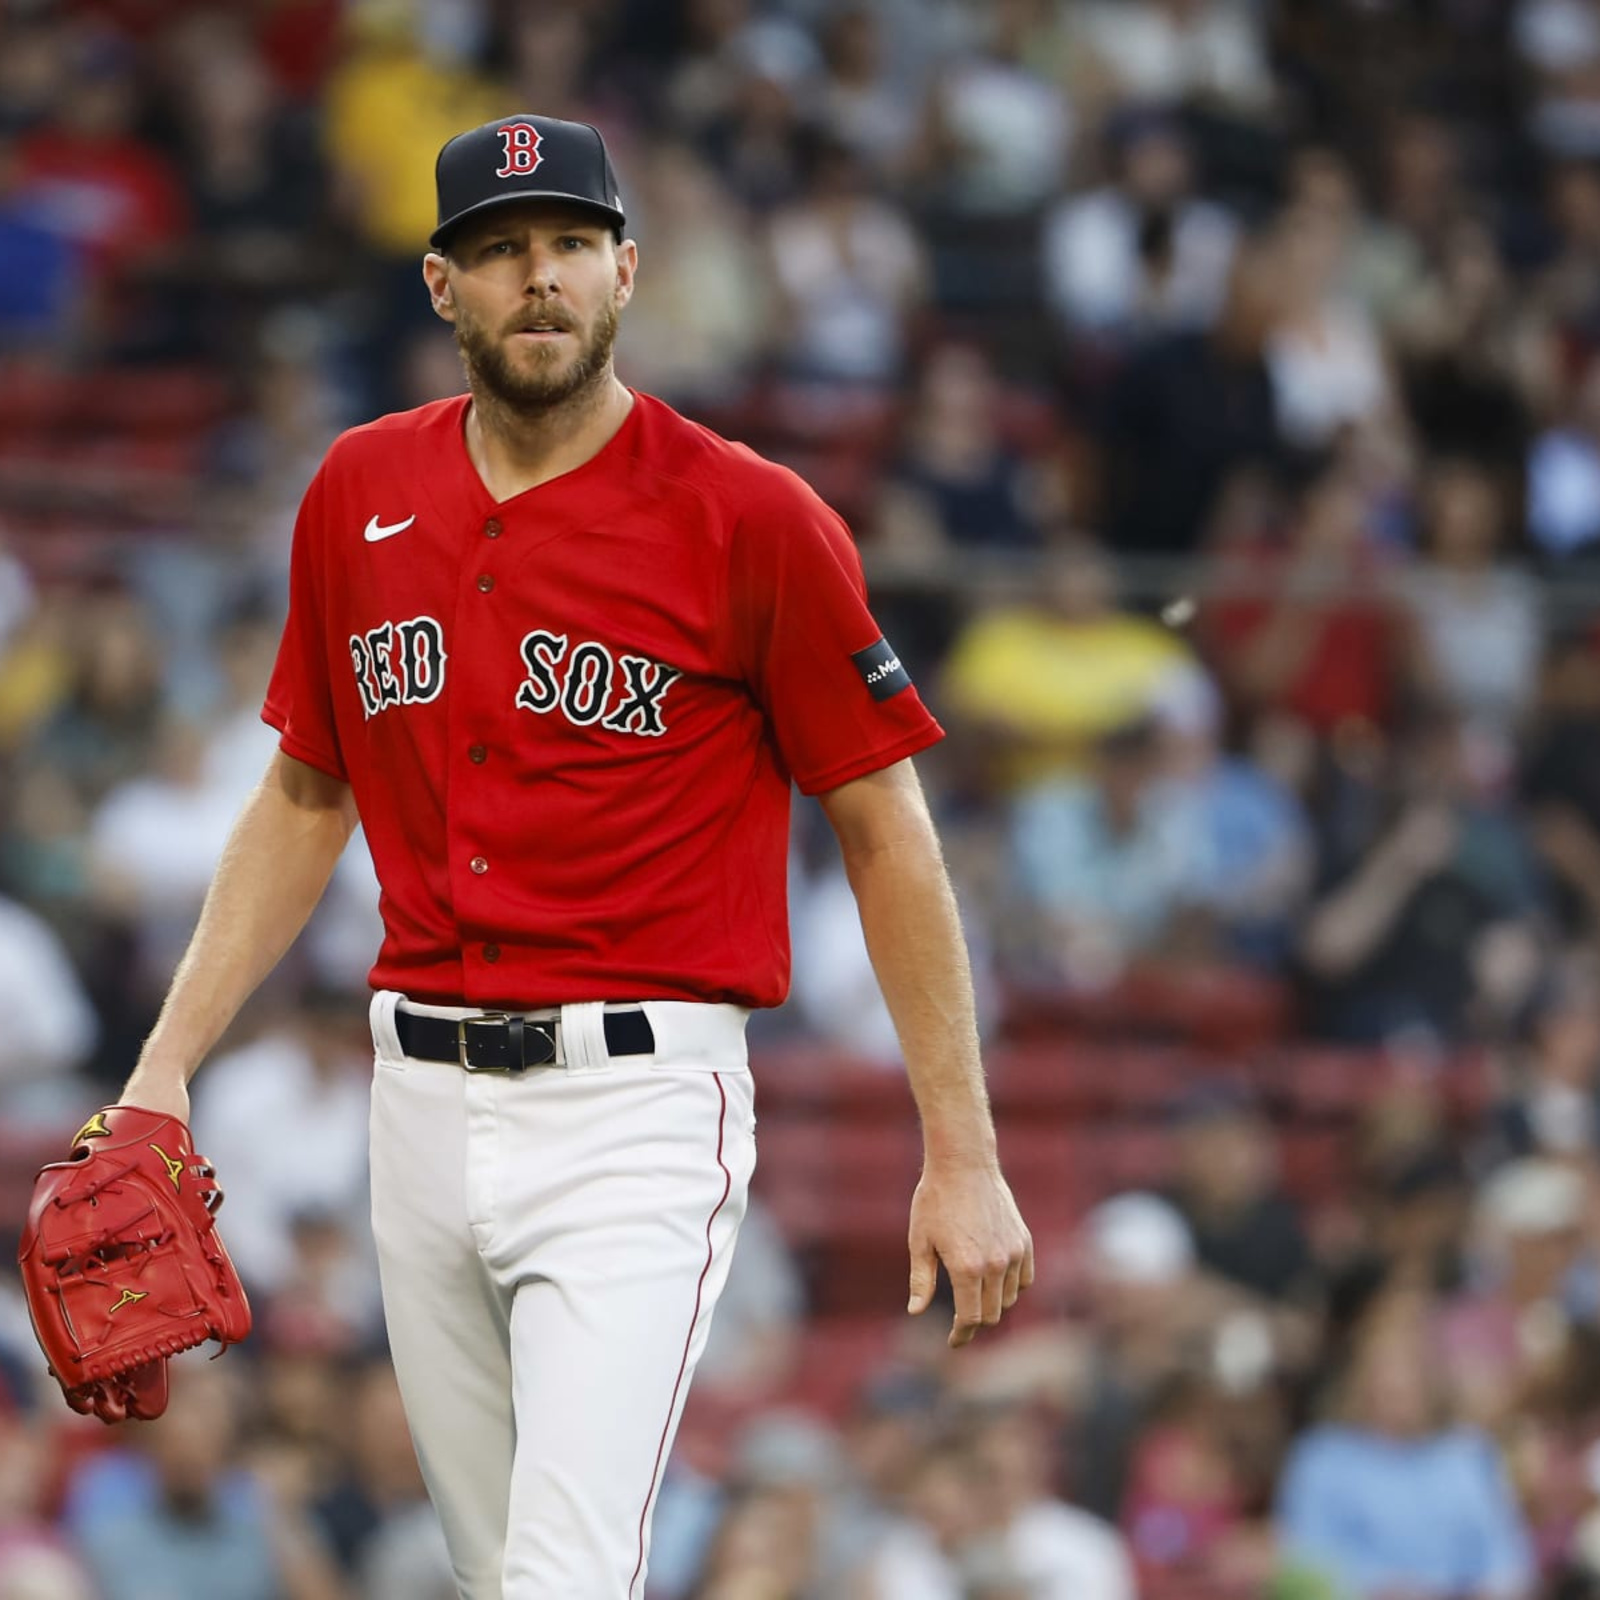 Former Chicago White Sox ace Chris Sale is out with injury